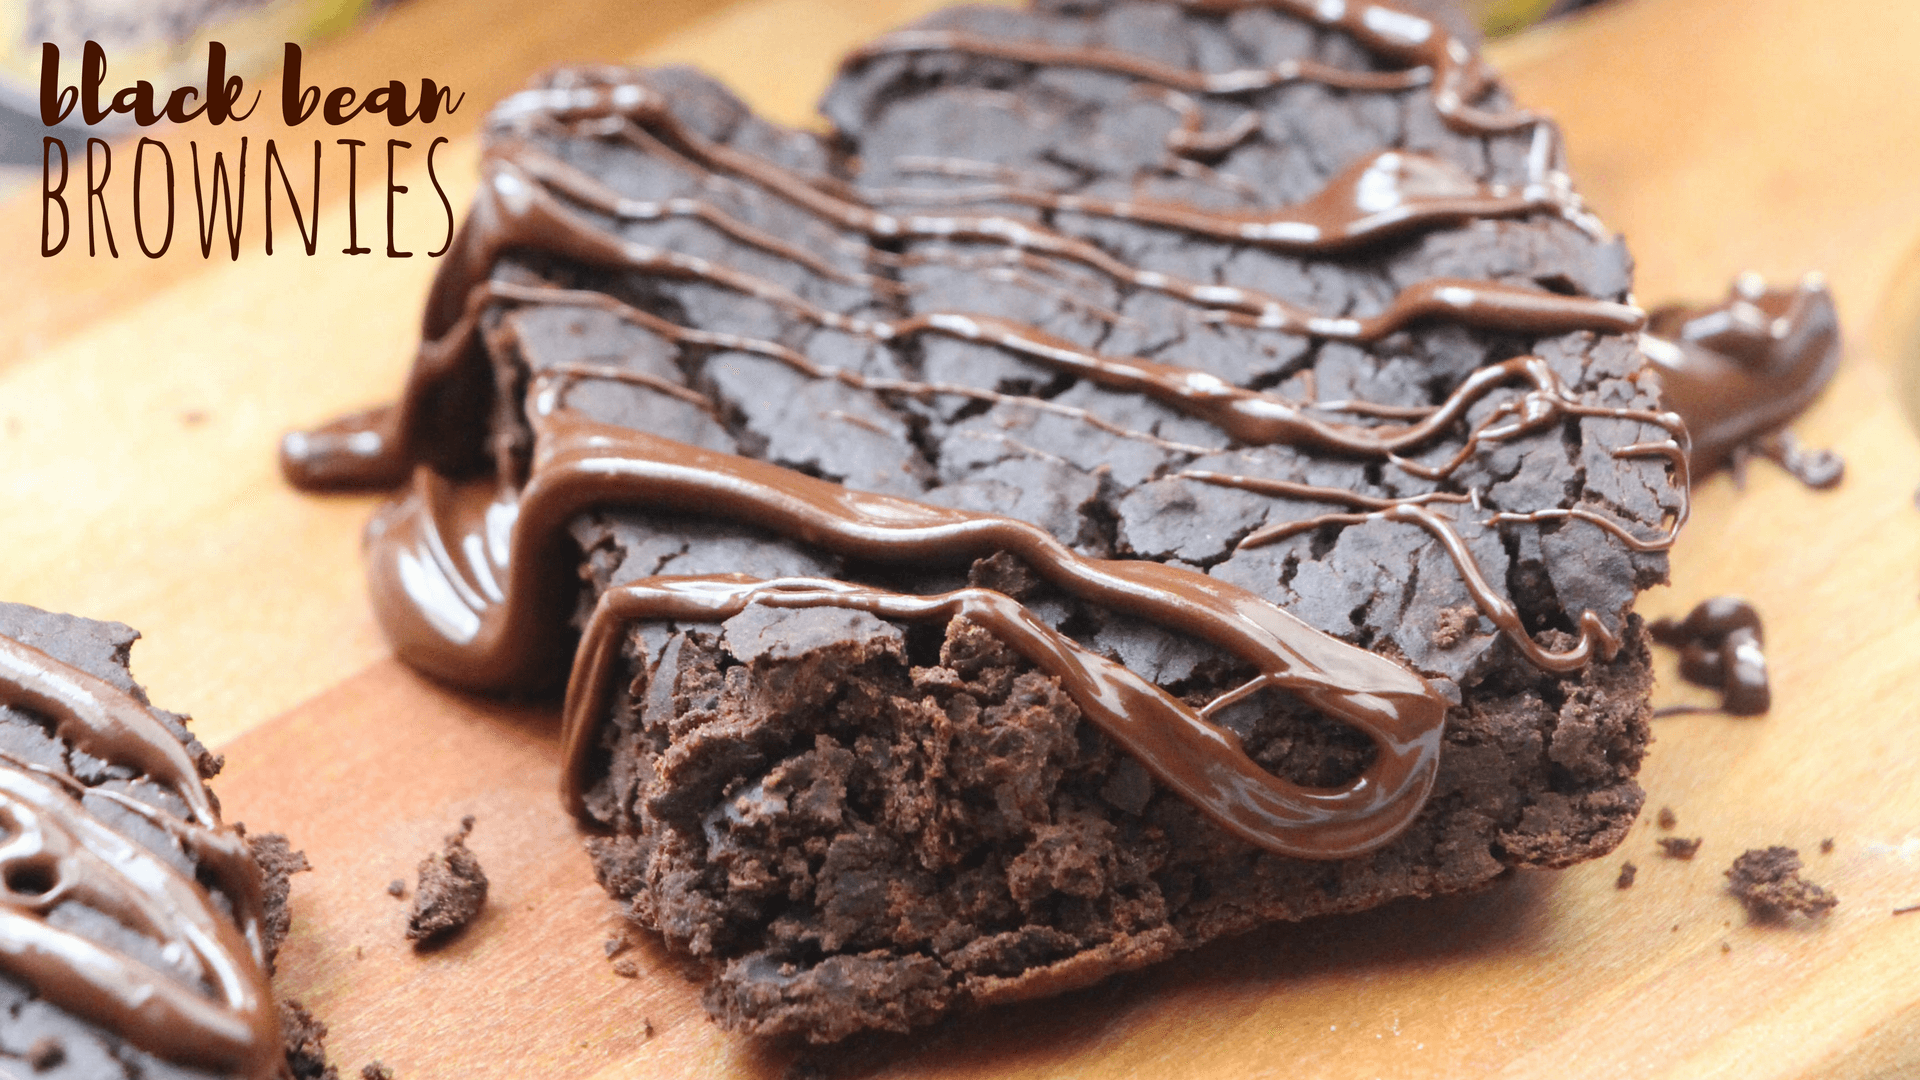 Yum! You have to taste these black bean brownies to believe just how good they are!